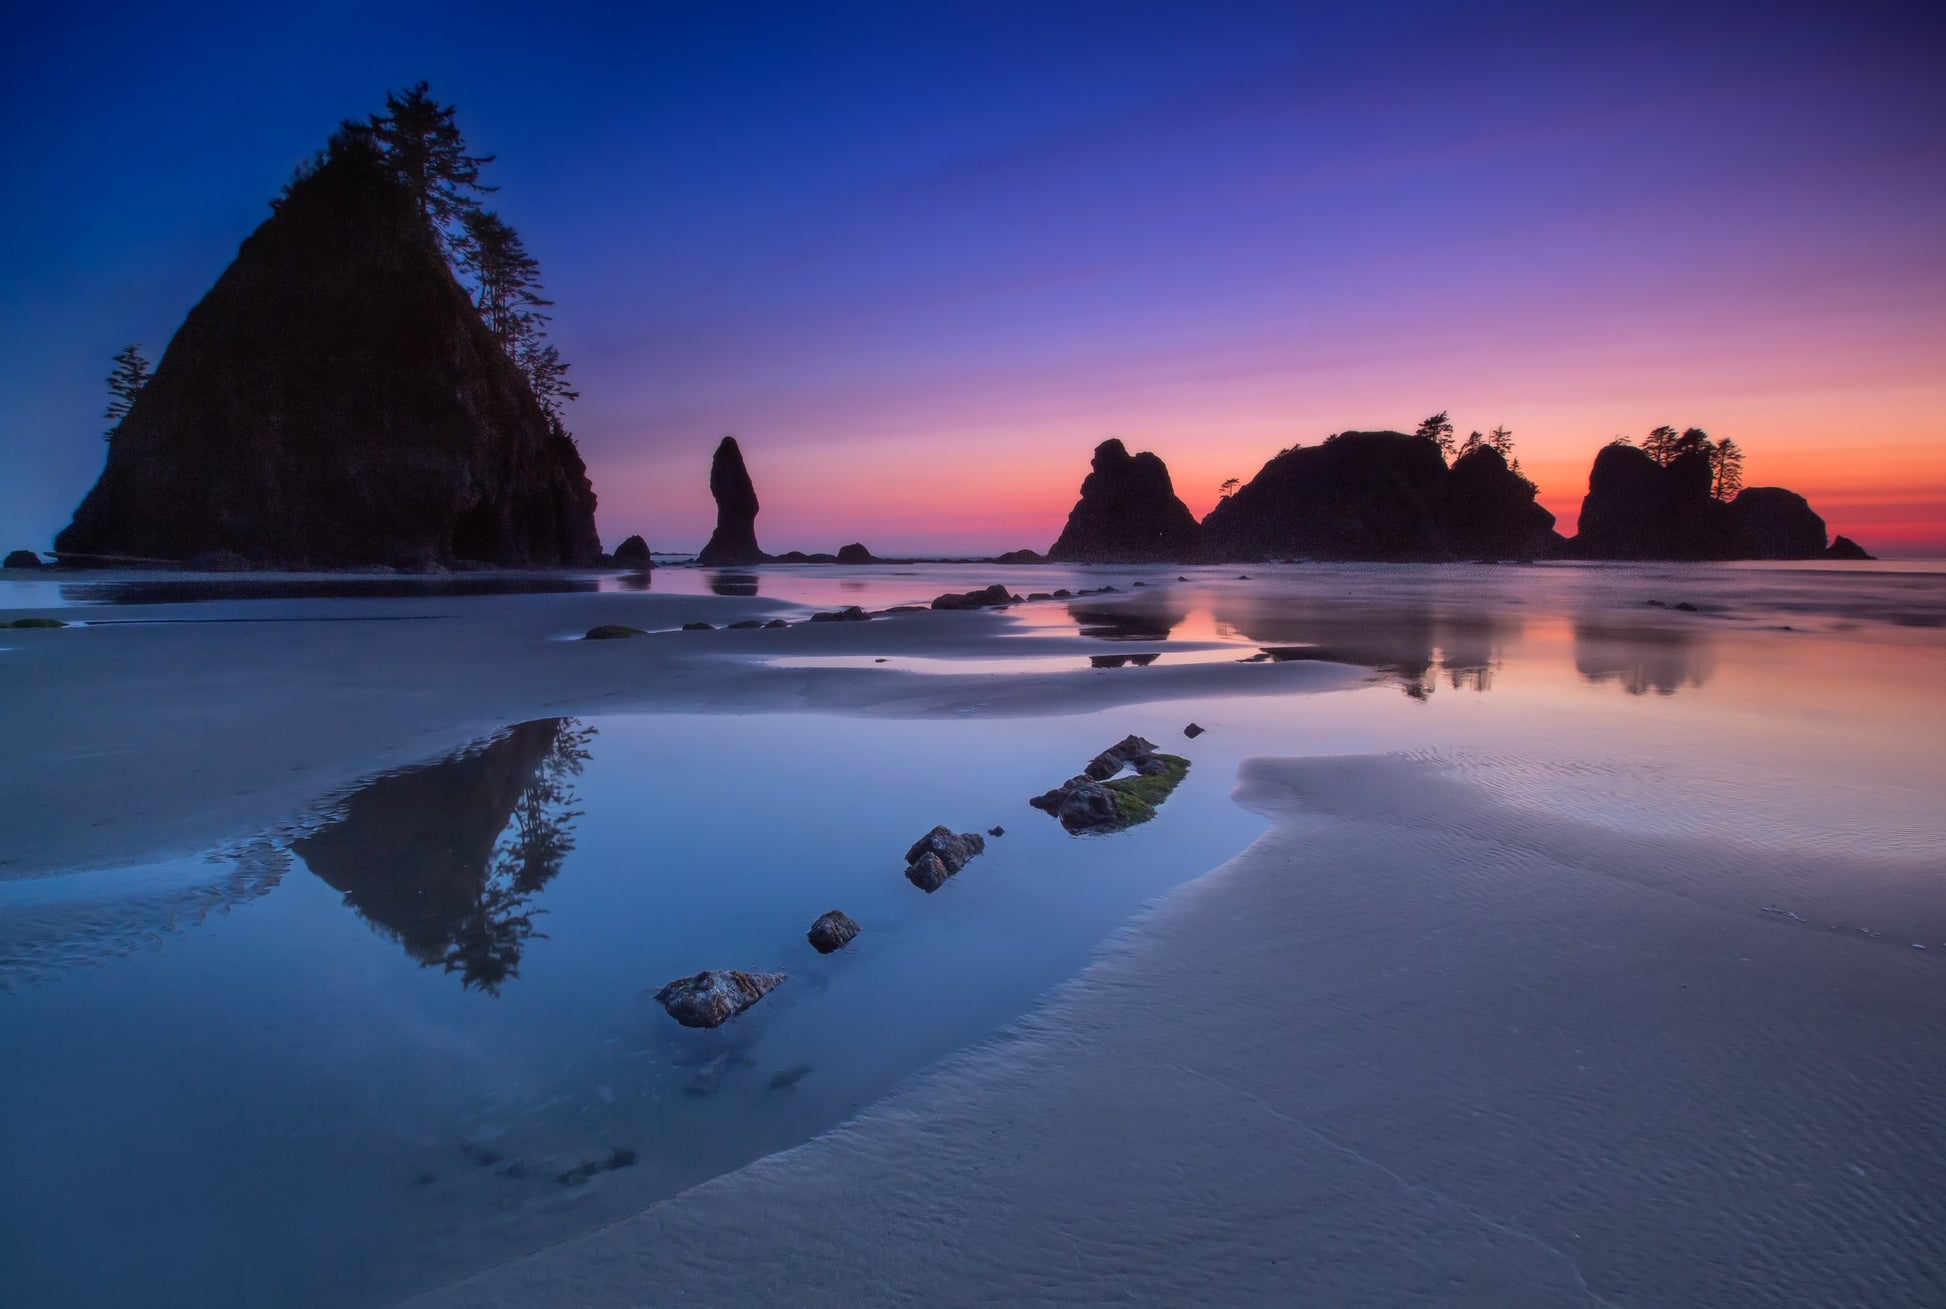 low tide at dusk on the rugged Wilderness Coast of Shi Shi Beach in Washington's Olympic National Park